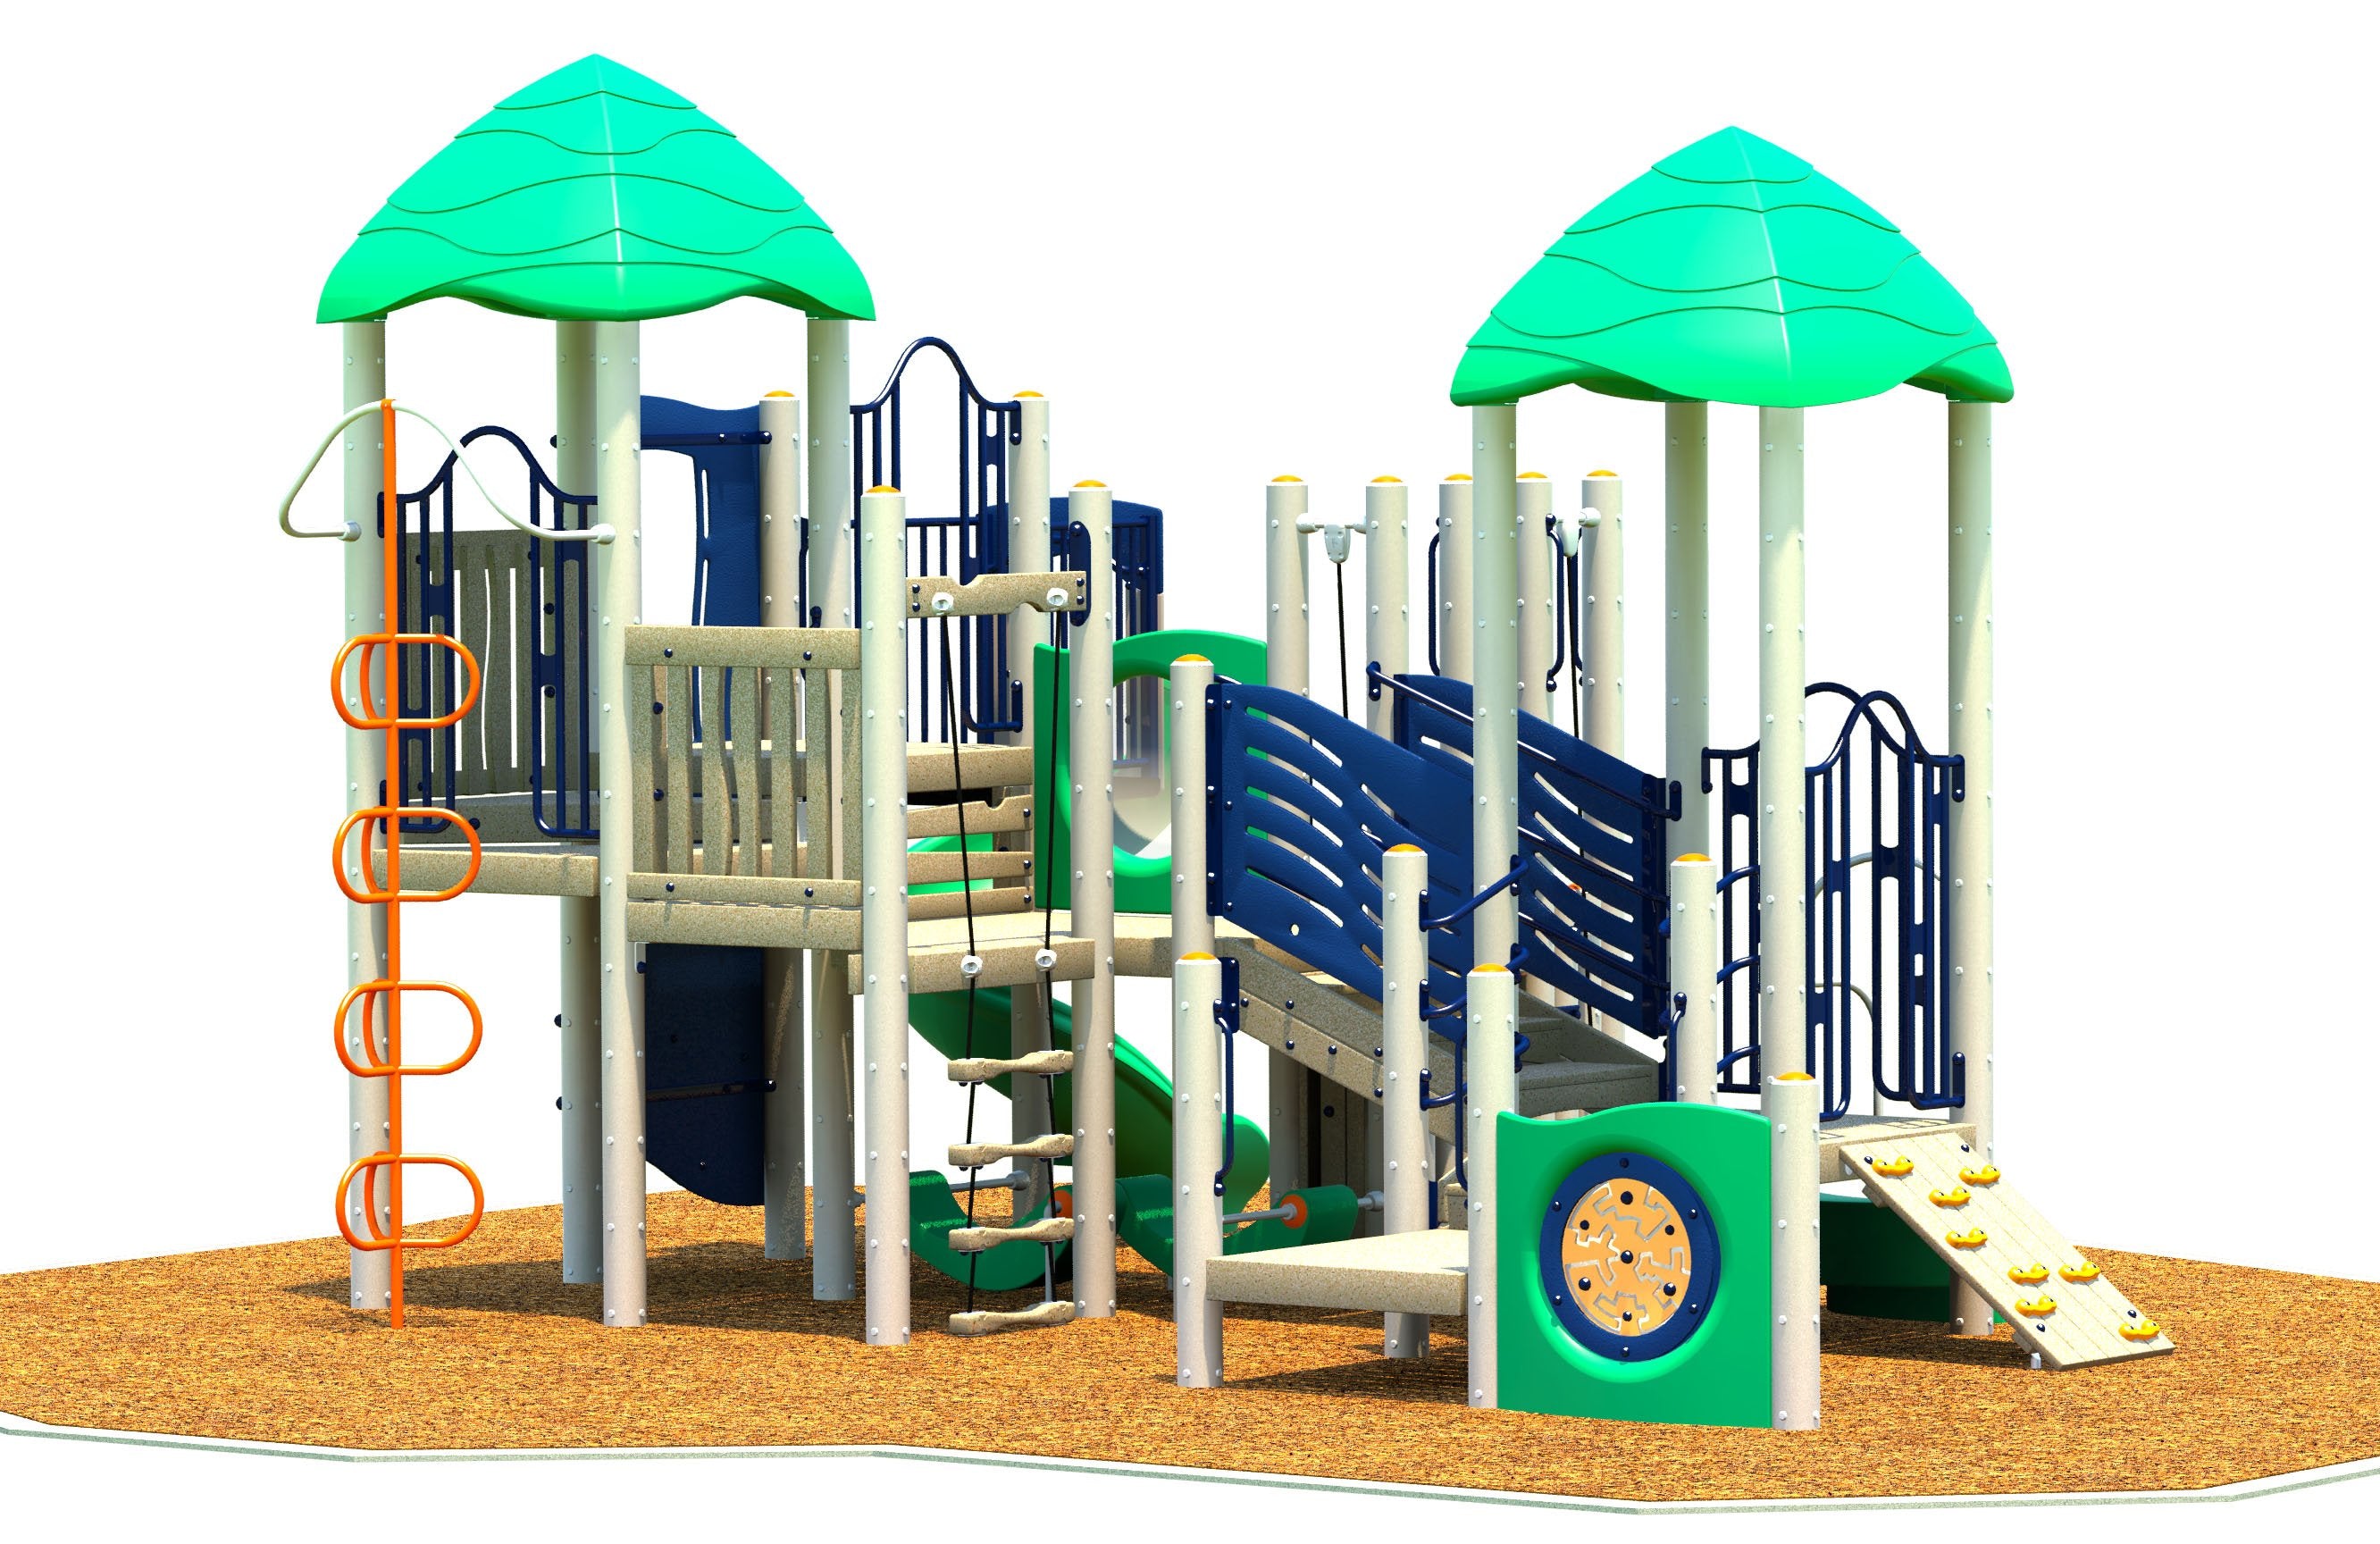 Overpass Play System  | WillyGoat Playground & Park Equipment